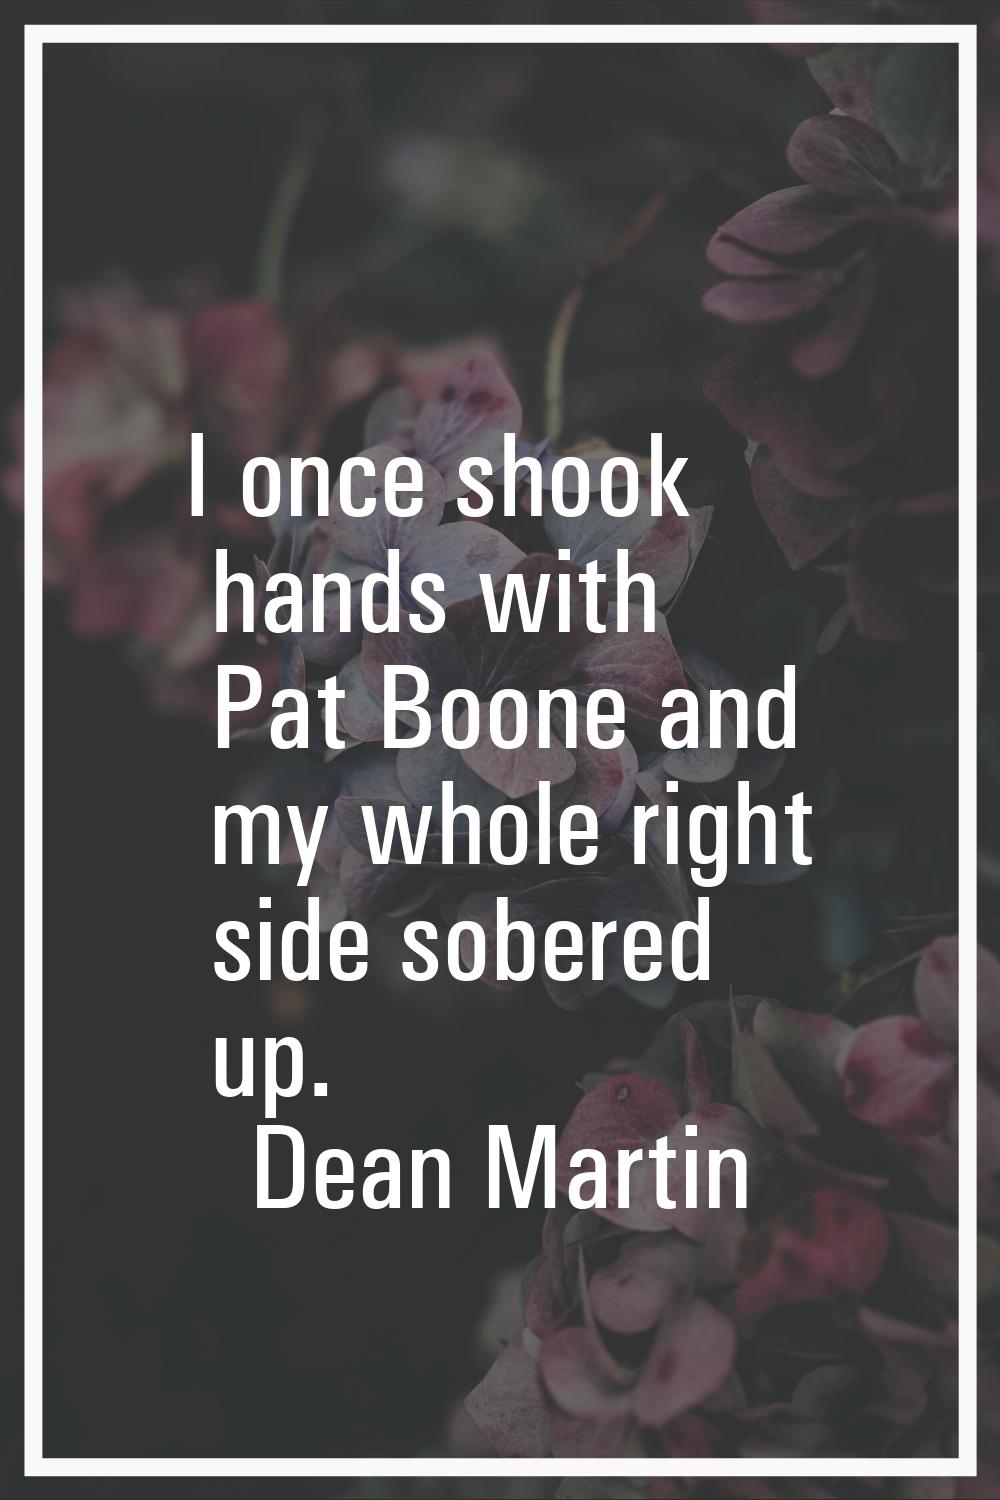 I once shook hands with Pat Boone and my whole right side sobered up.